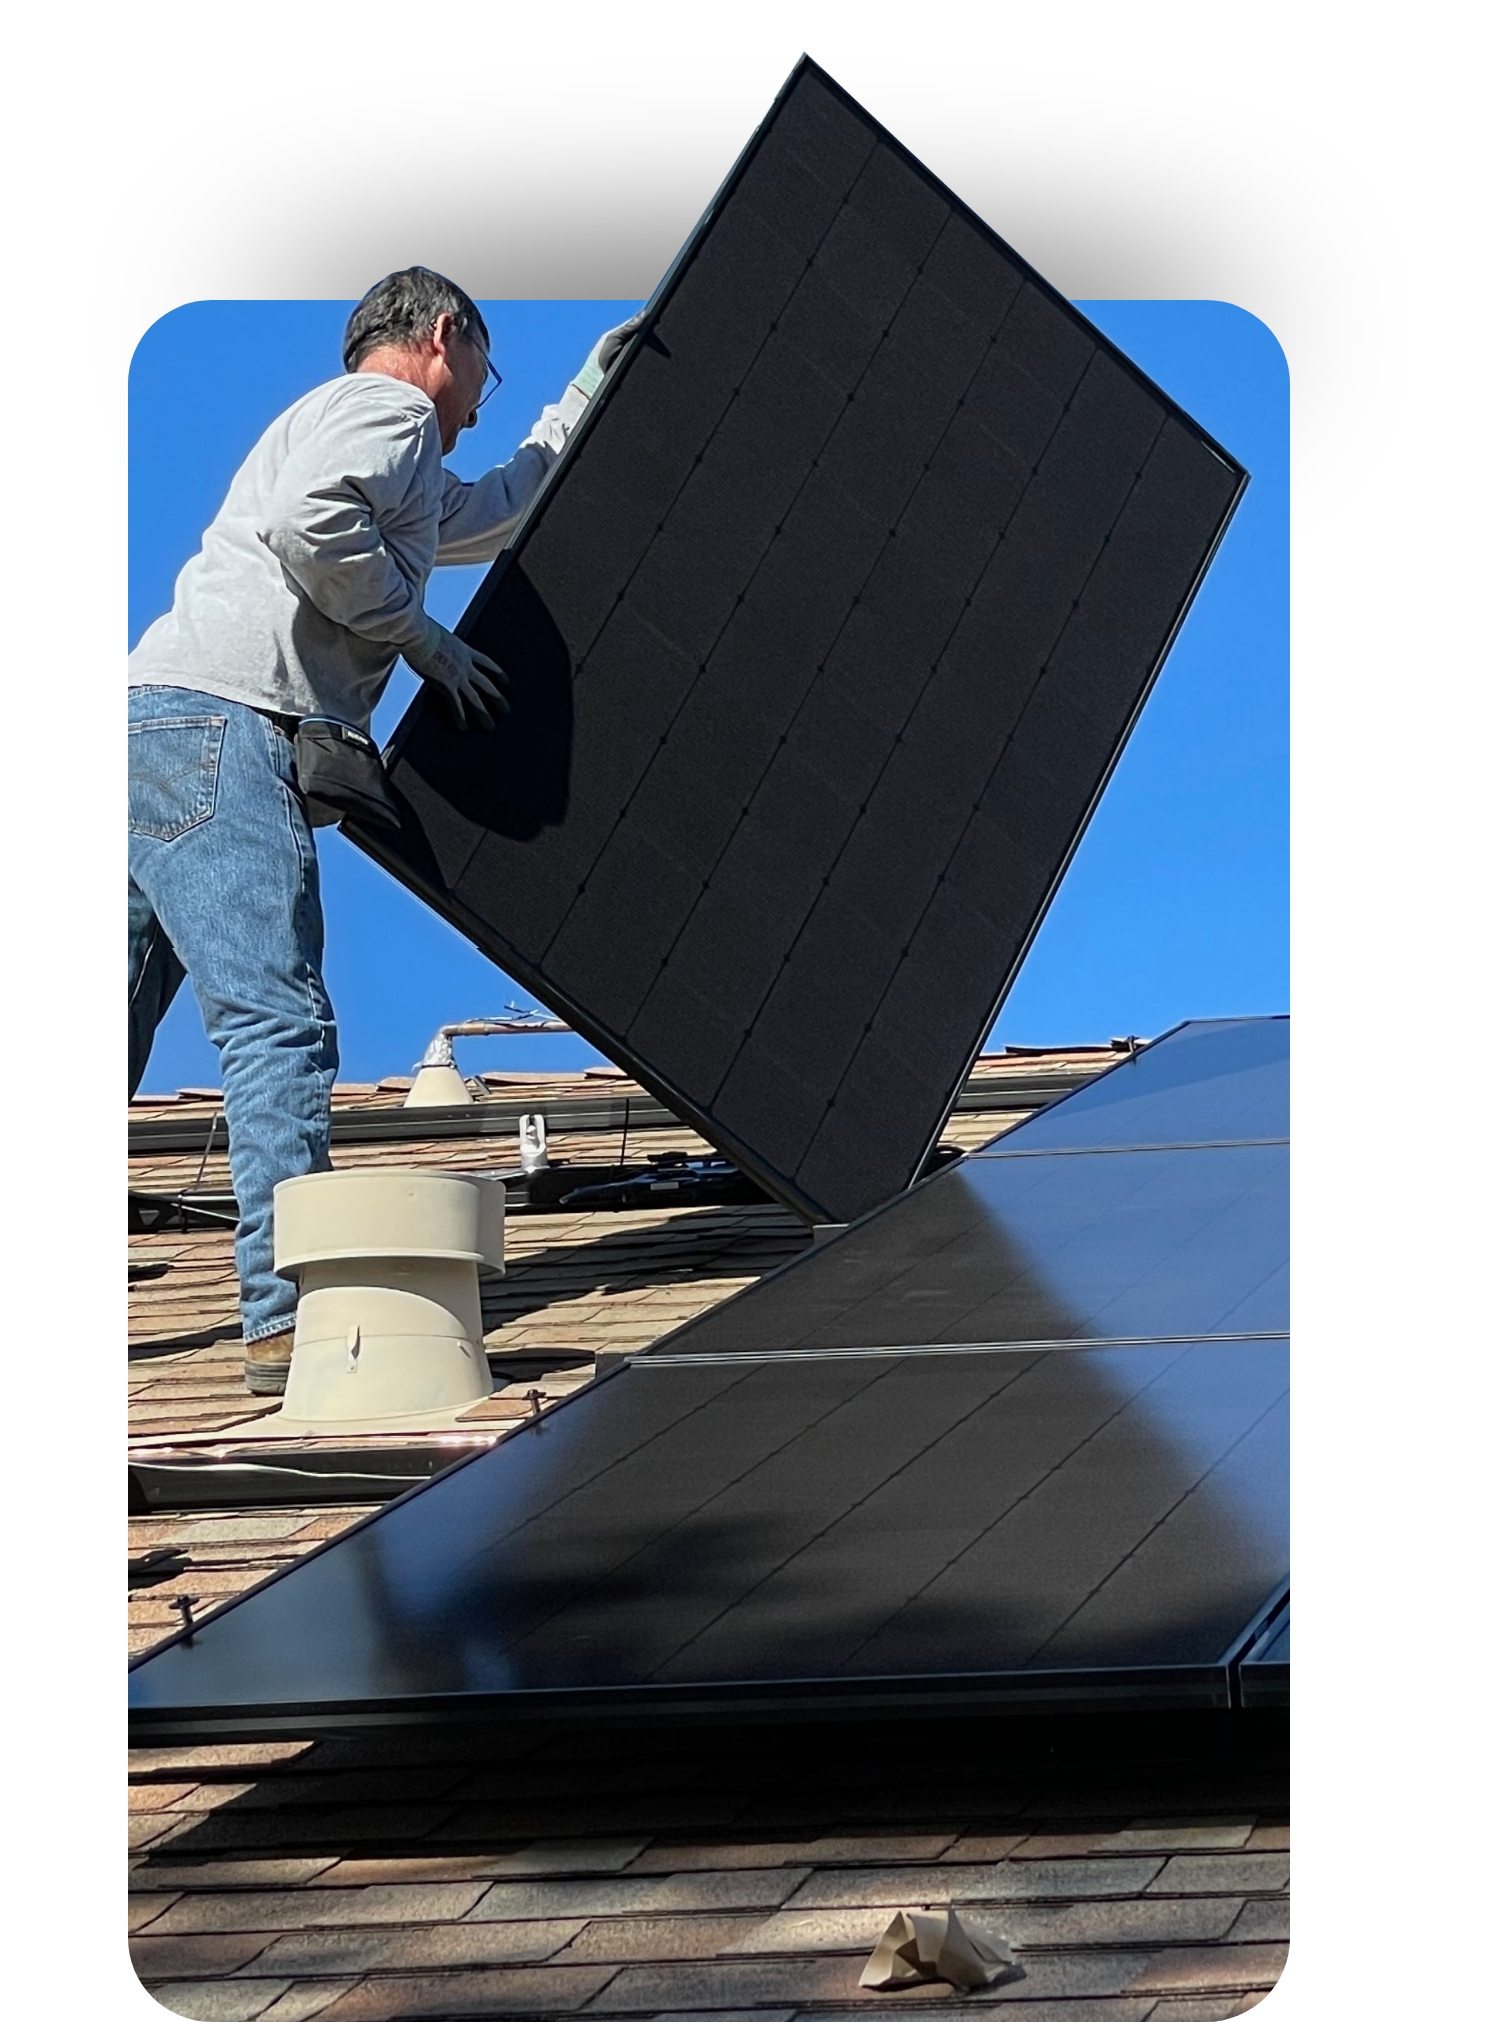 As the best solar company in Denver Metro and Greenwood Village, CO, Solar by Peak to Peak is the solar installer you need to take advantage of solar savings with the best solar equipment.